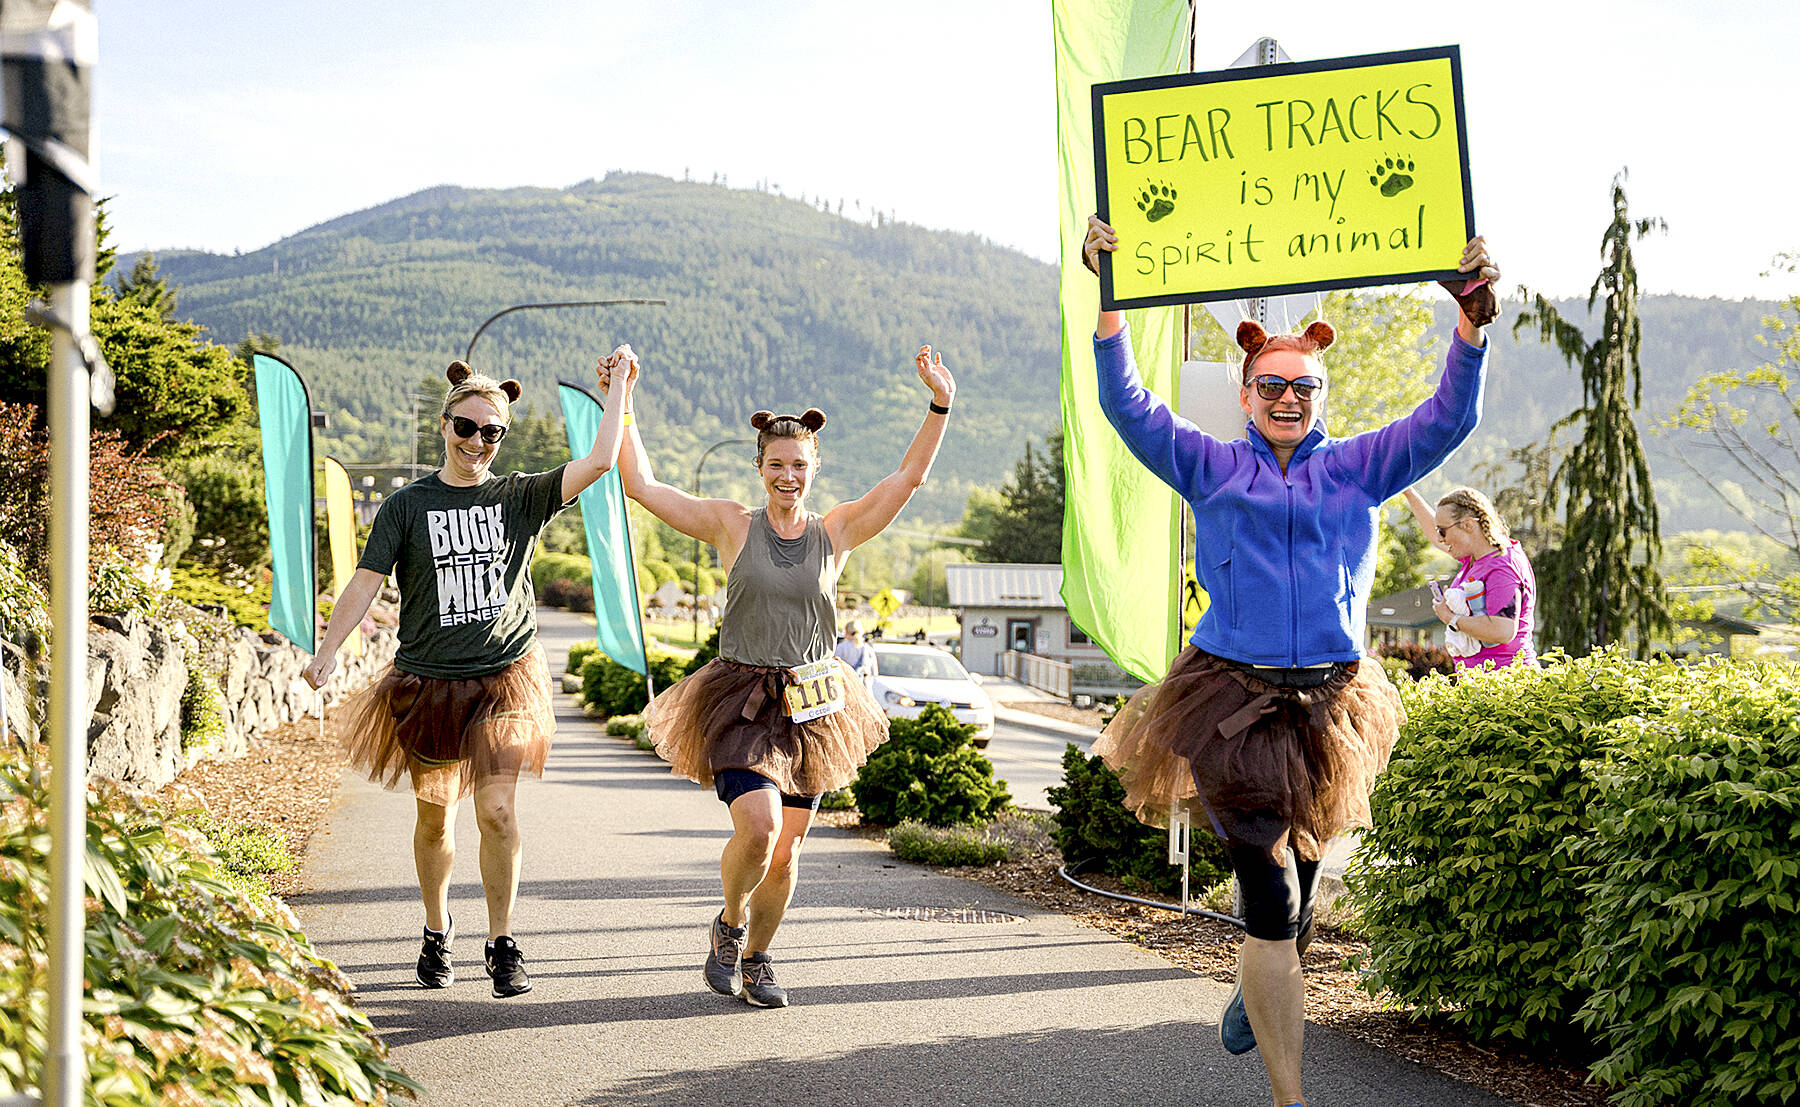 Members of the Bear Tracks team compete at the third Frosty Moss Relay Race in May 2021. A total of 44 teams competed in the event held by Peninsula Adventure Sports.
Matt Sagen/Cascadia Films